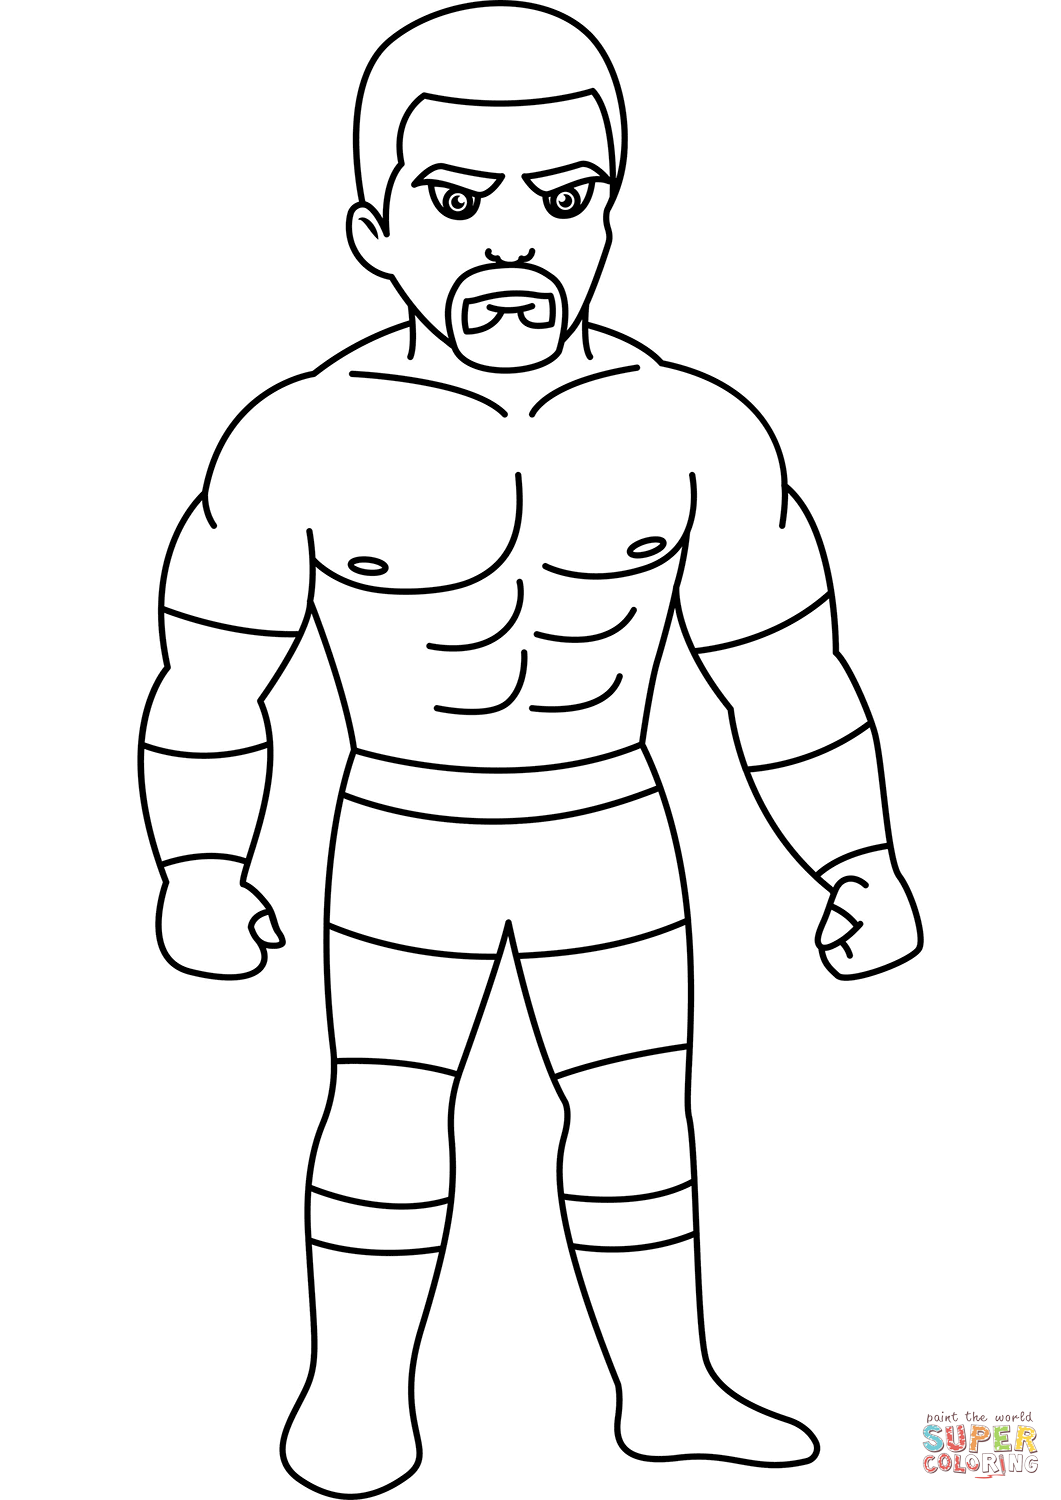 Cartoon wrestler coloring page free printable coloring pages